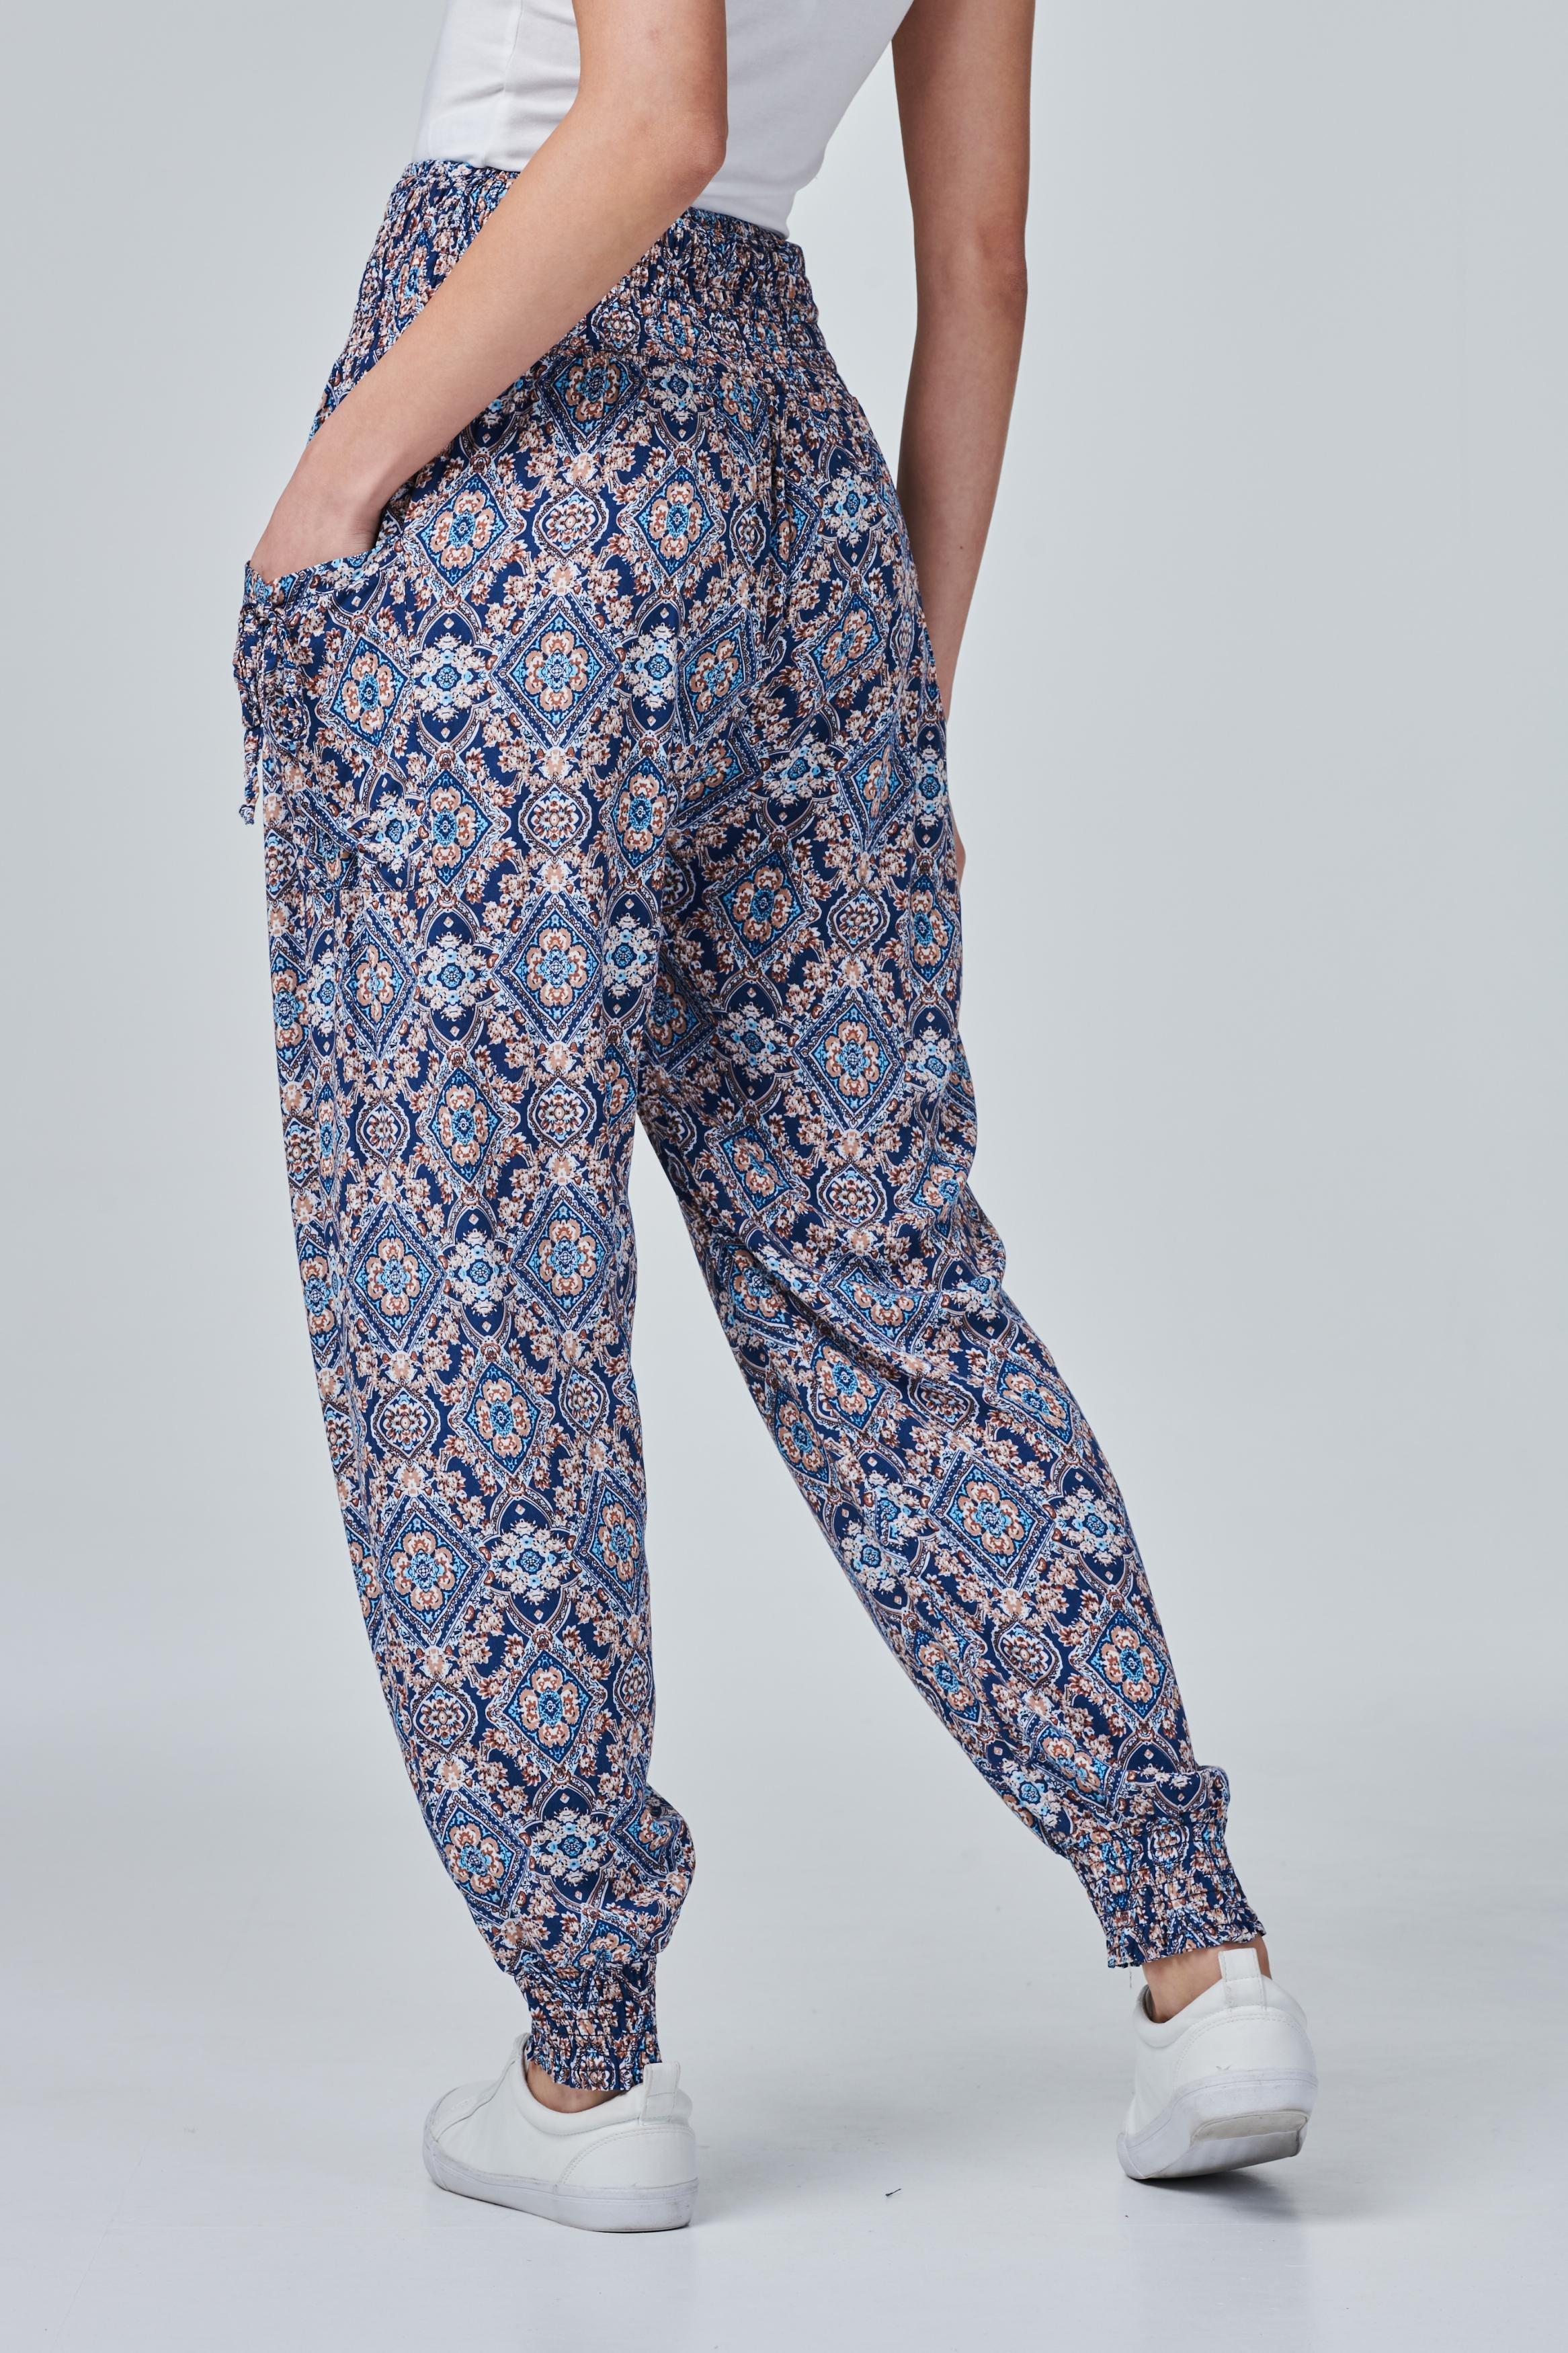 Buy DOROTHY PERKINS Women Navy Printed Trousers - Trousers for Women  5460249 | Myntra